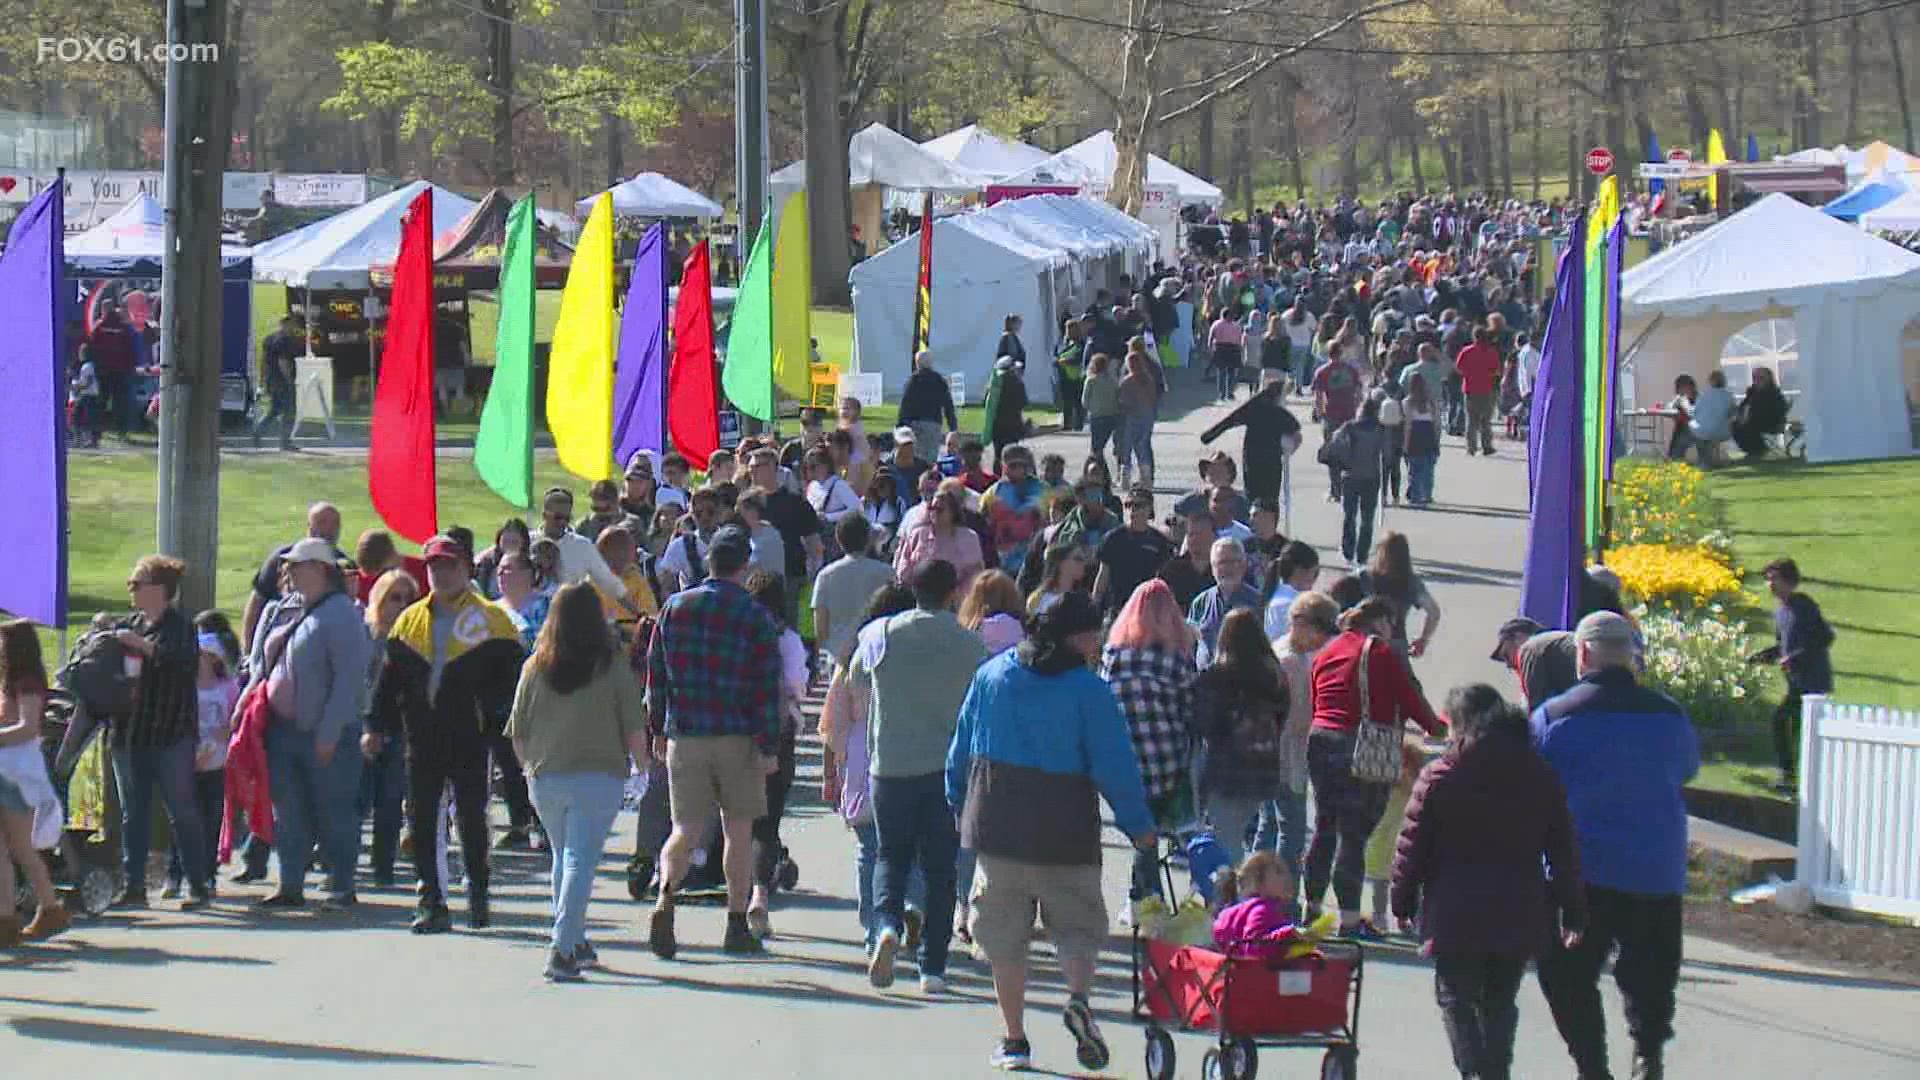 The festival will continue on Sunday starting at 10 a.m. to 5 p.m.